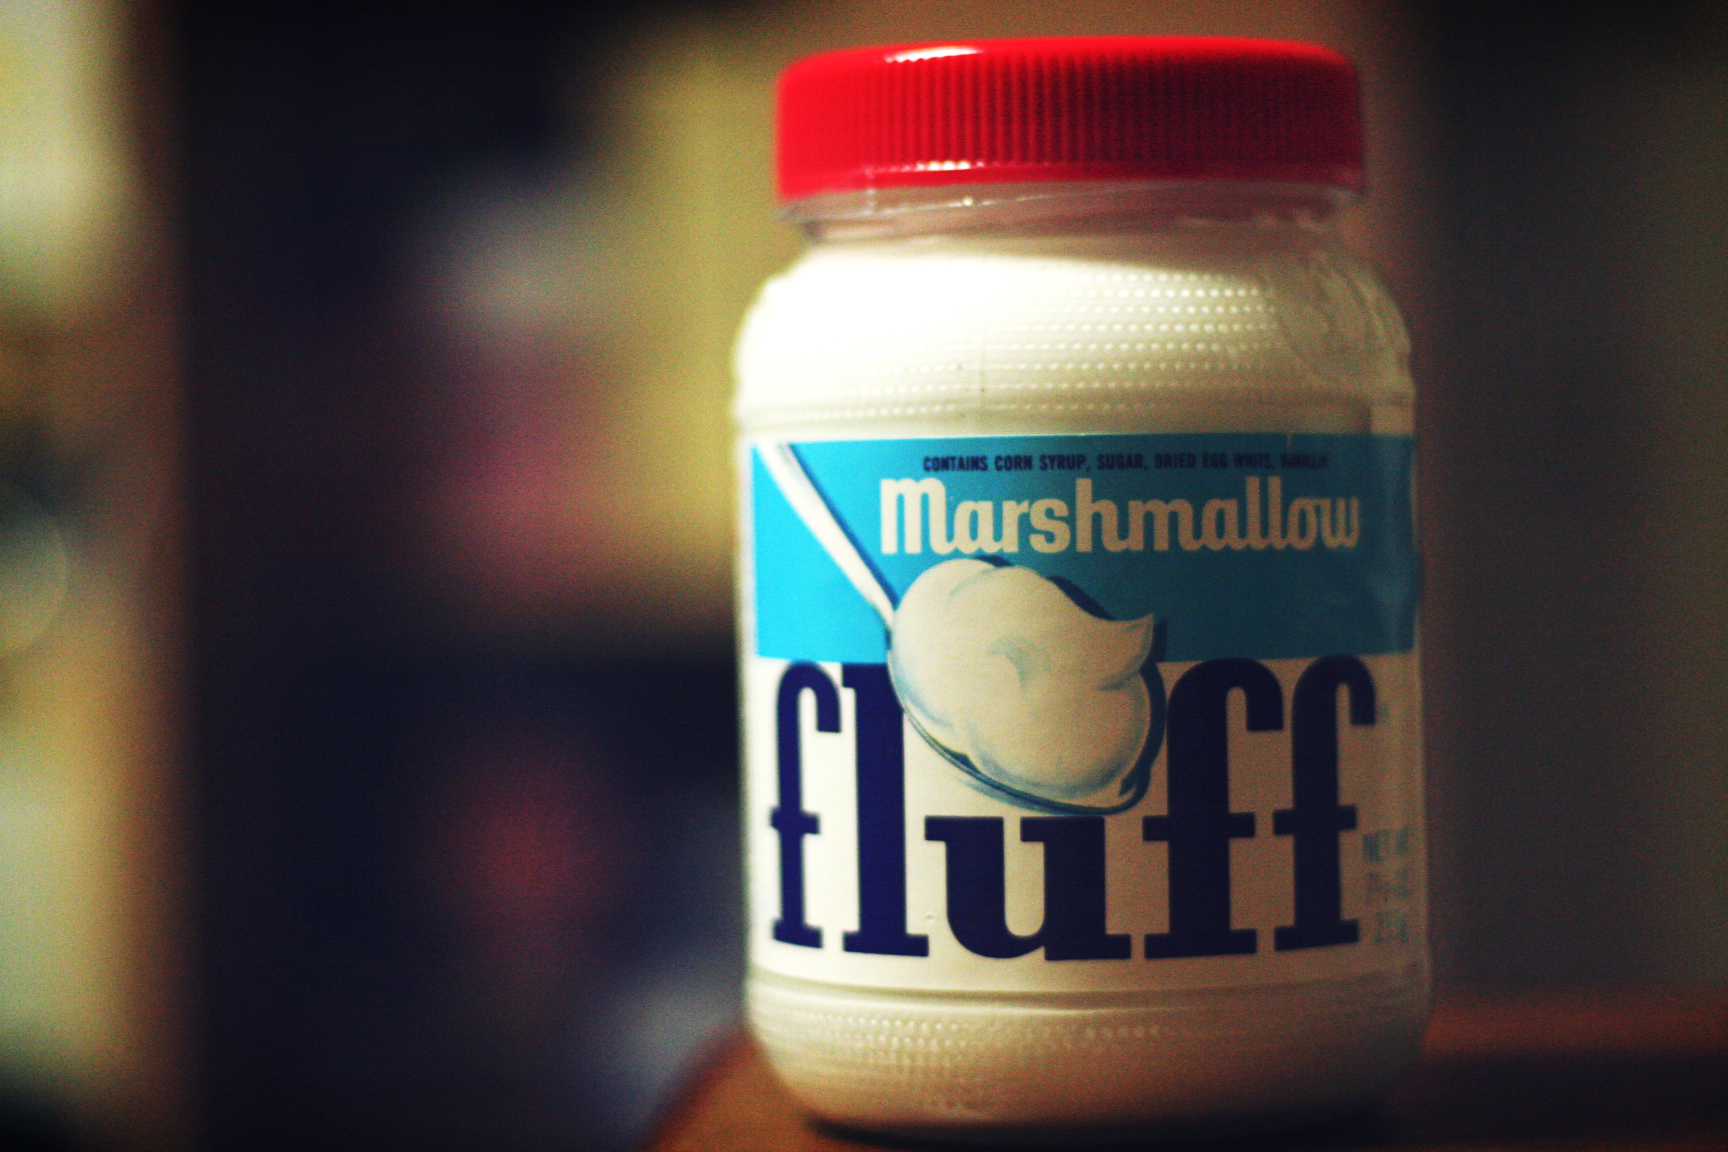 Product shot of a jar of marshmallow Fluff with a red cap and a light blue and white label with dark blue lettering. The jar appears in front of a dark, blurred background.